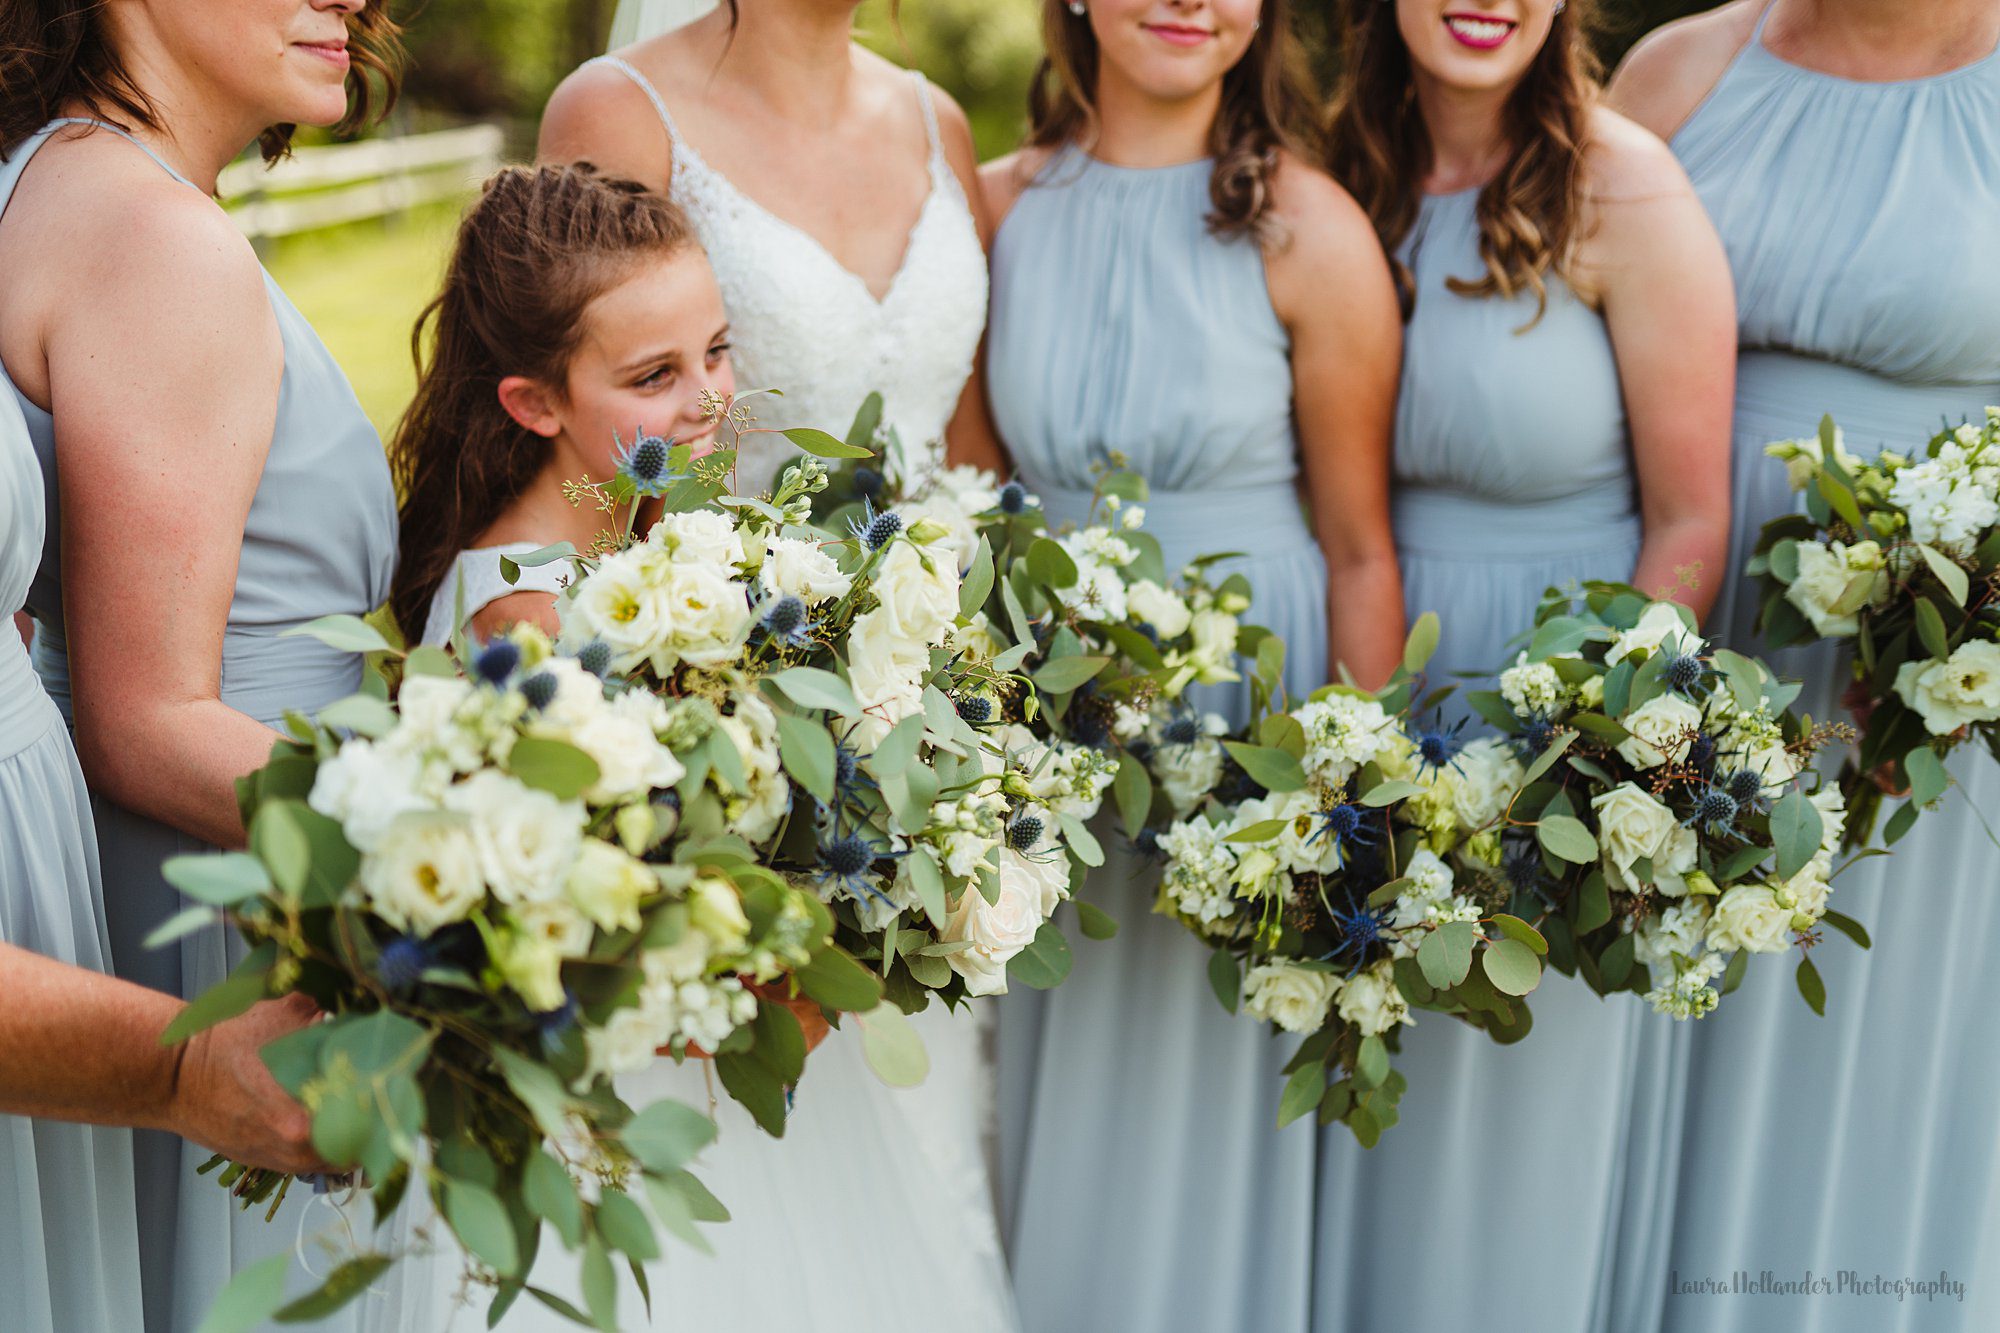 bridal party portraits, fenton winery and brewery, gray bridesmaids dress